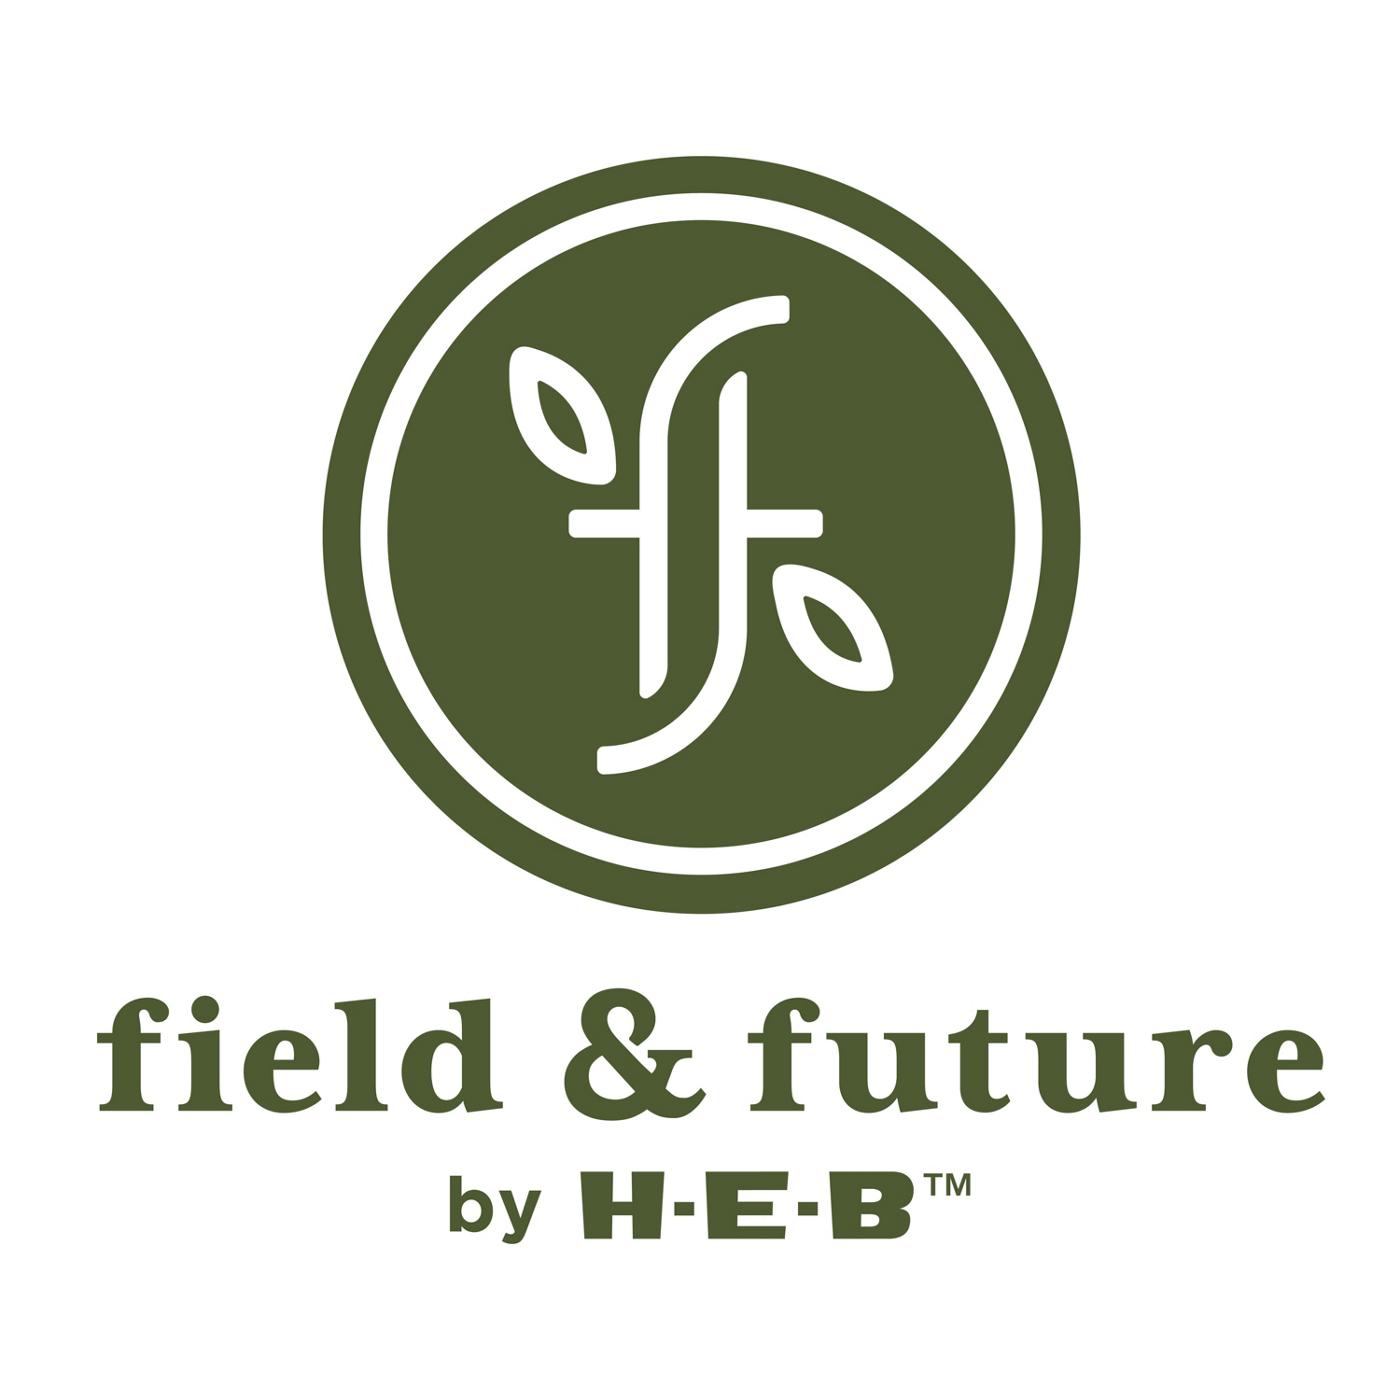 Field & Future by H-E-B Foaming Hand Soap – Hill Country Laurel; image 2 of 3